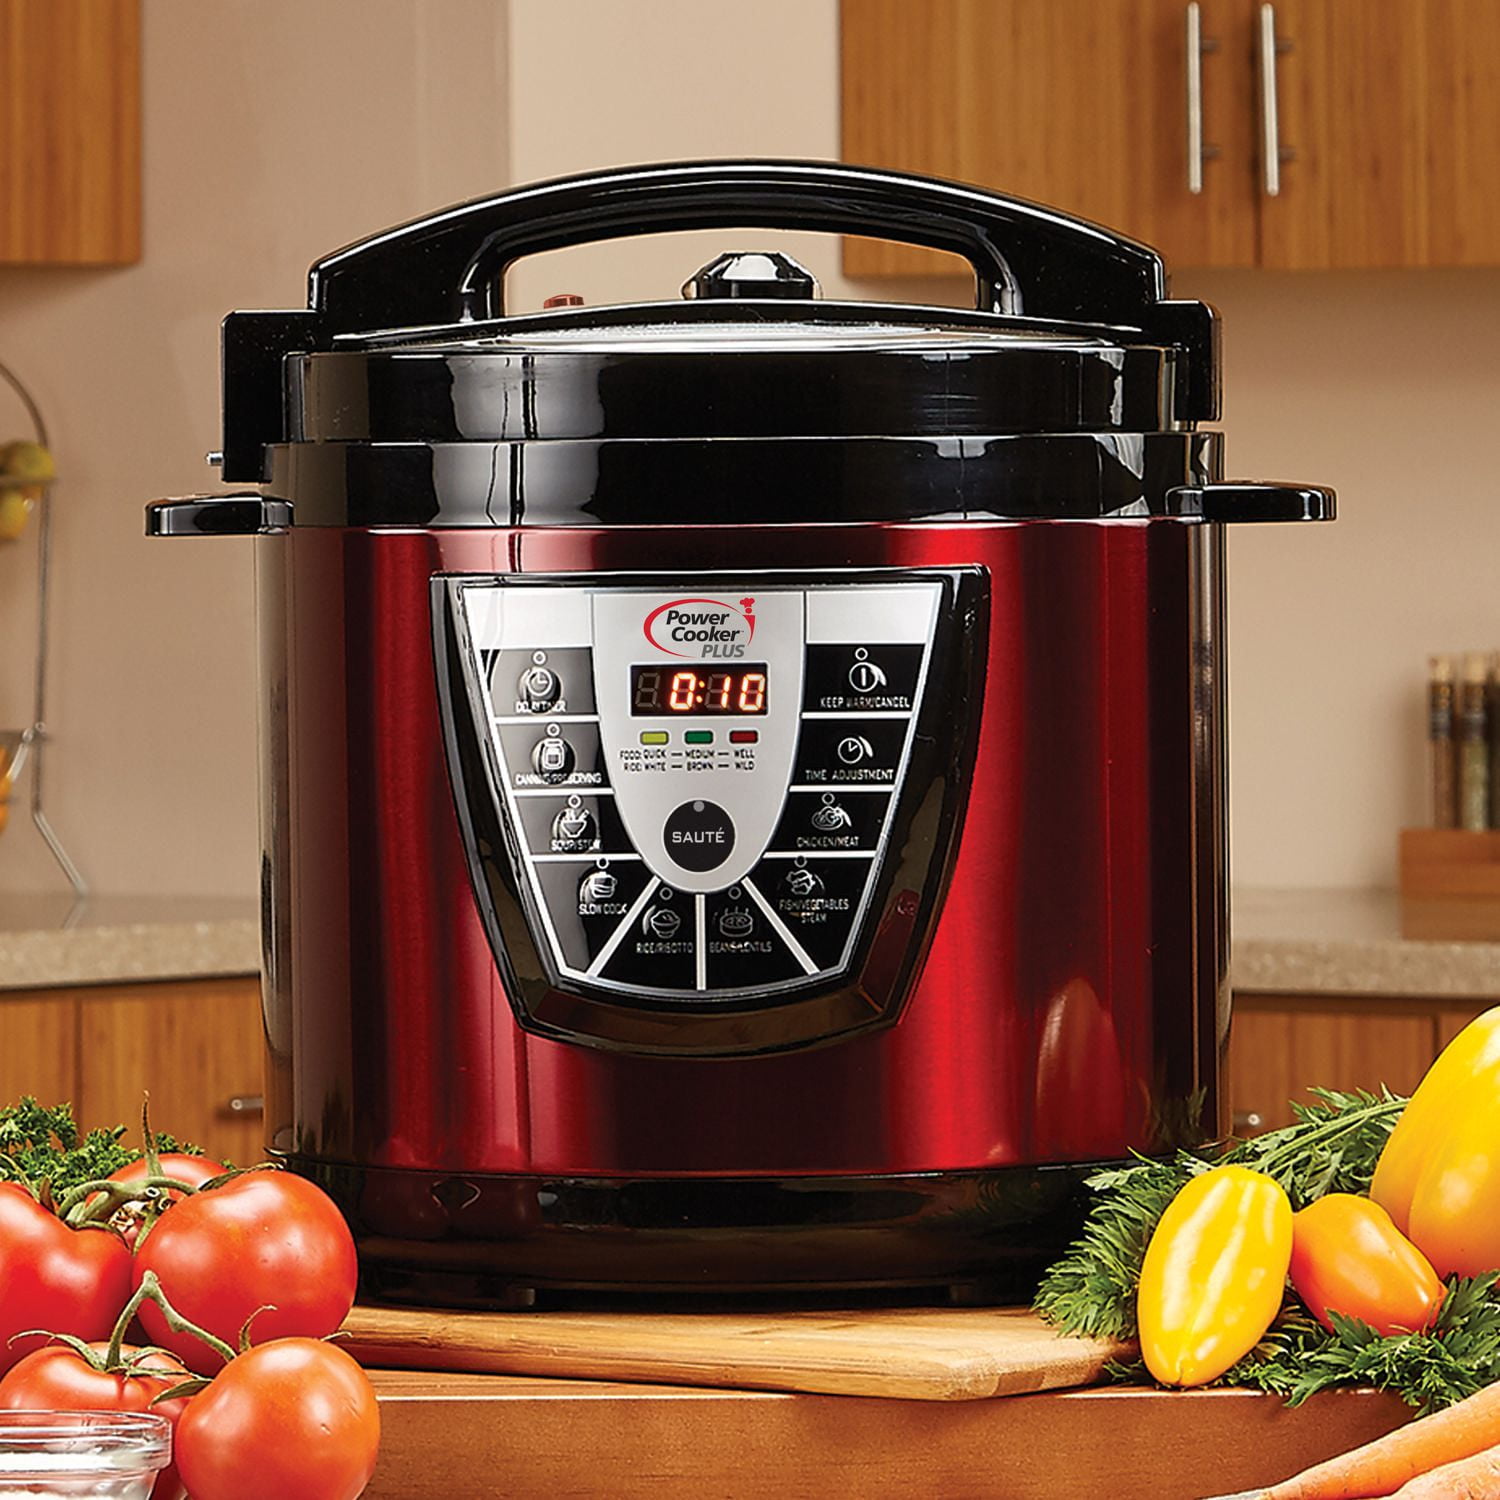 Outlet Express - New! Power XL 8 QT Pressure Cooker in the color Cinnamon -  can also slow cook, warm, brown, steam & it also does canning! ❤️